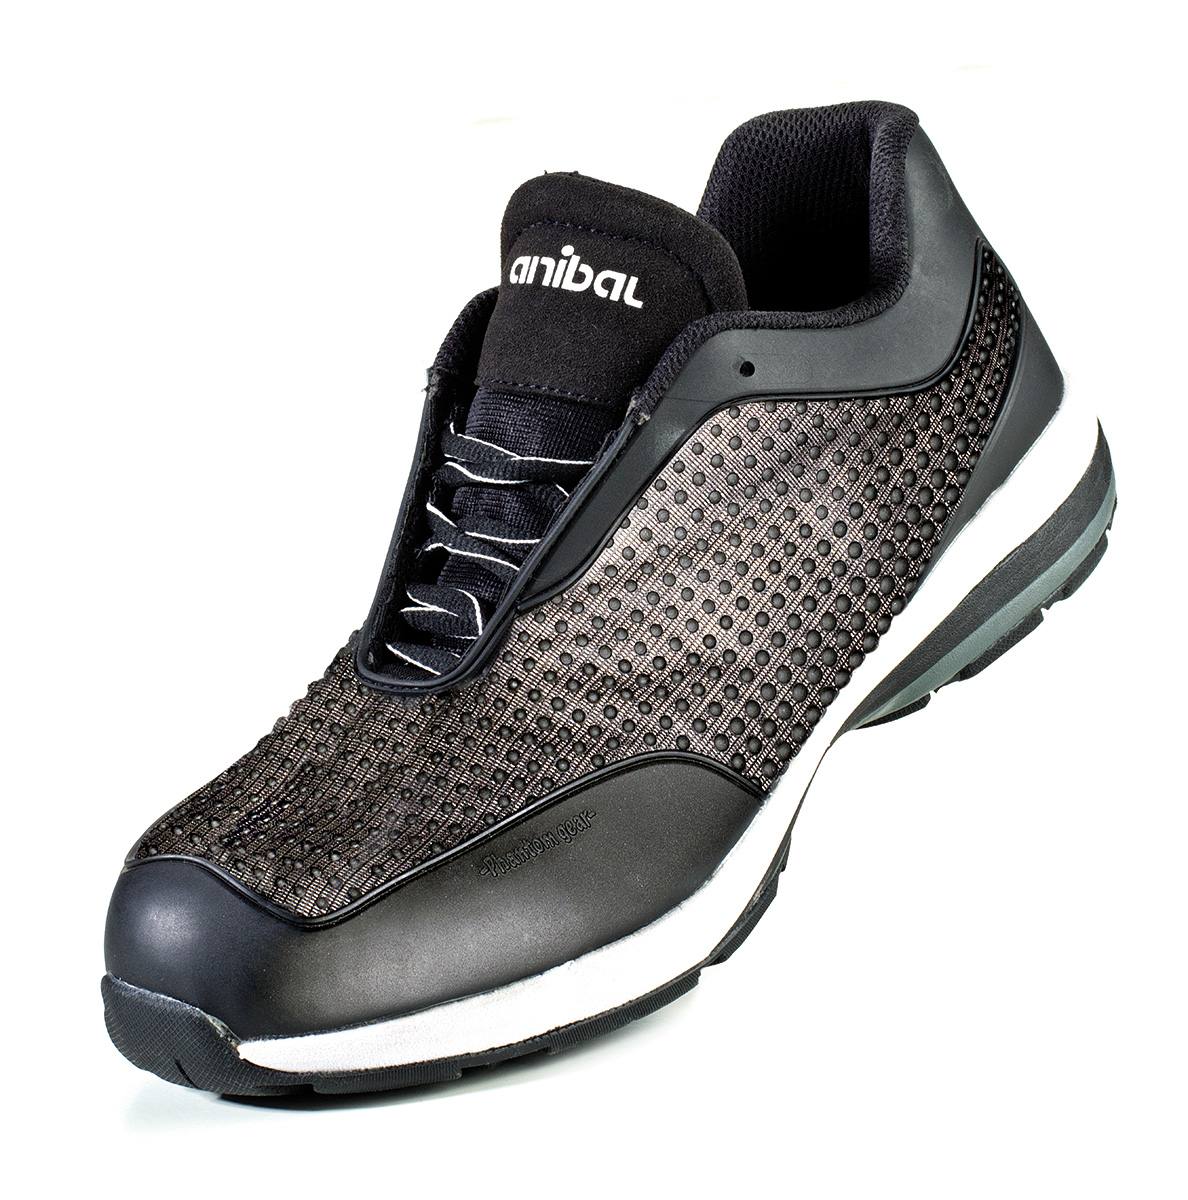 1688-ZPH Safety Footwear Sporty Mod. “OXILOS”. Microfiber with high visibility Phantom technology in S1P. EVA dual density outsole / SRC rubber.